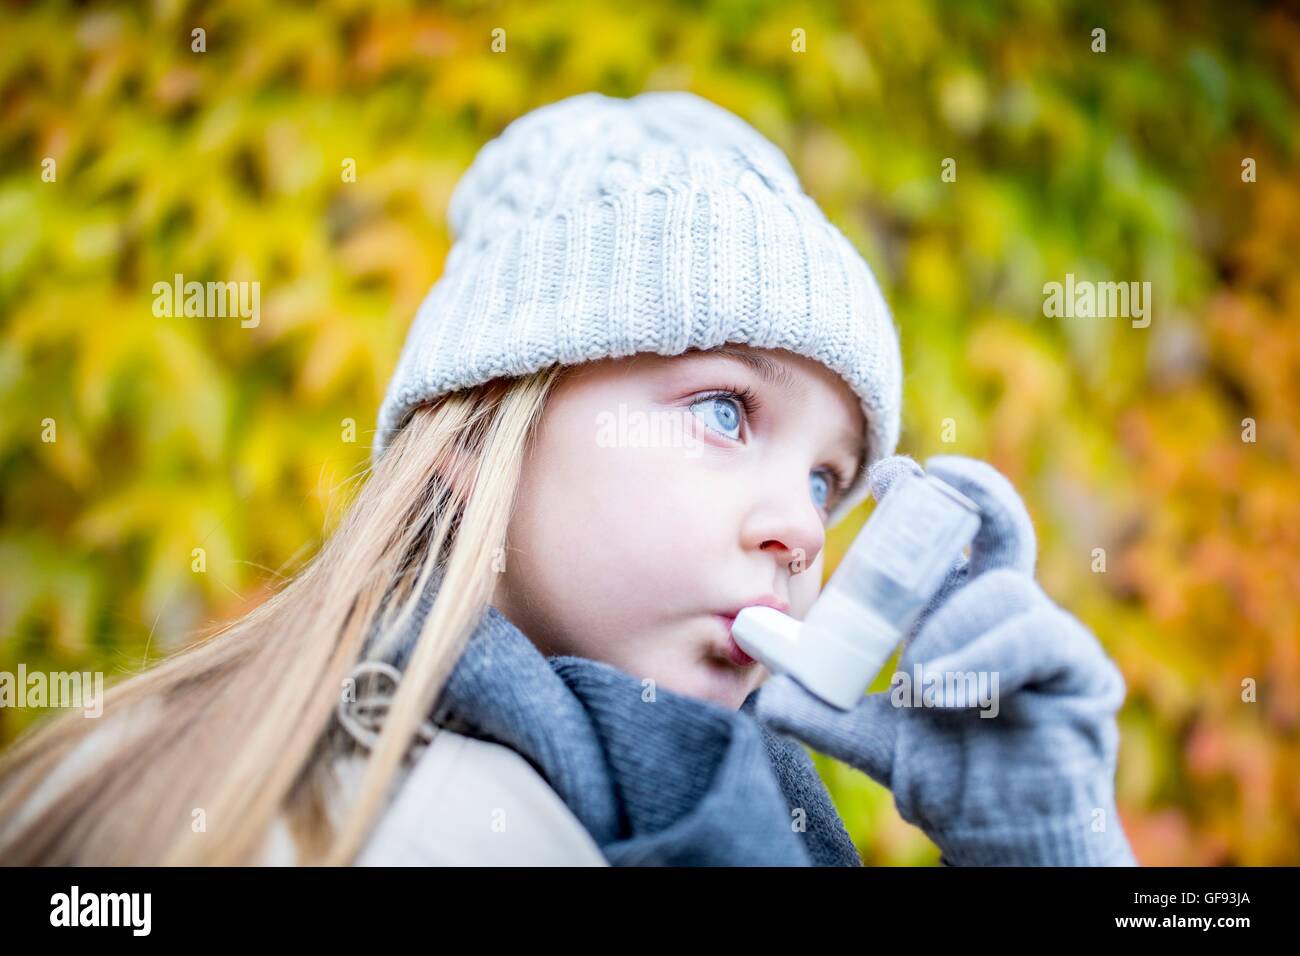 MODEL RELEASED. Young girl using asthma inhaler, close-up. Stock Photo